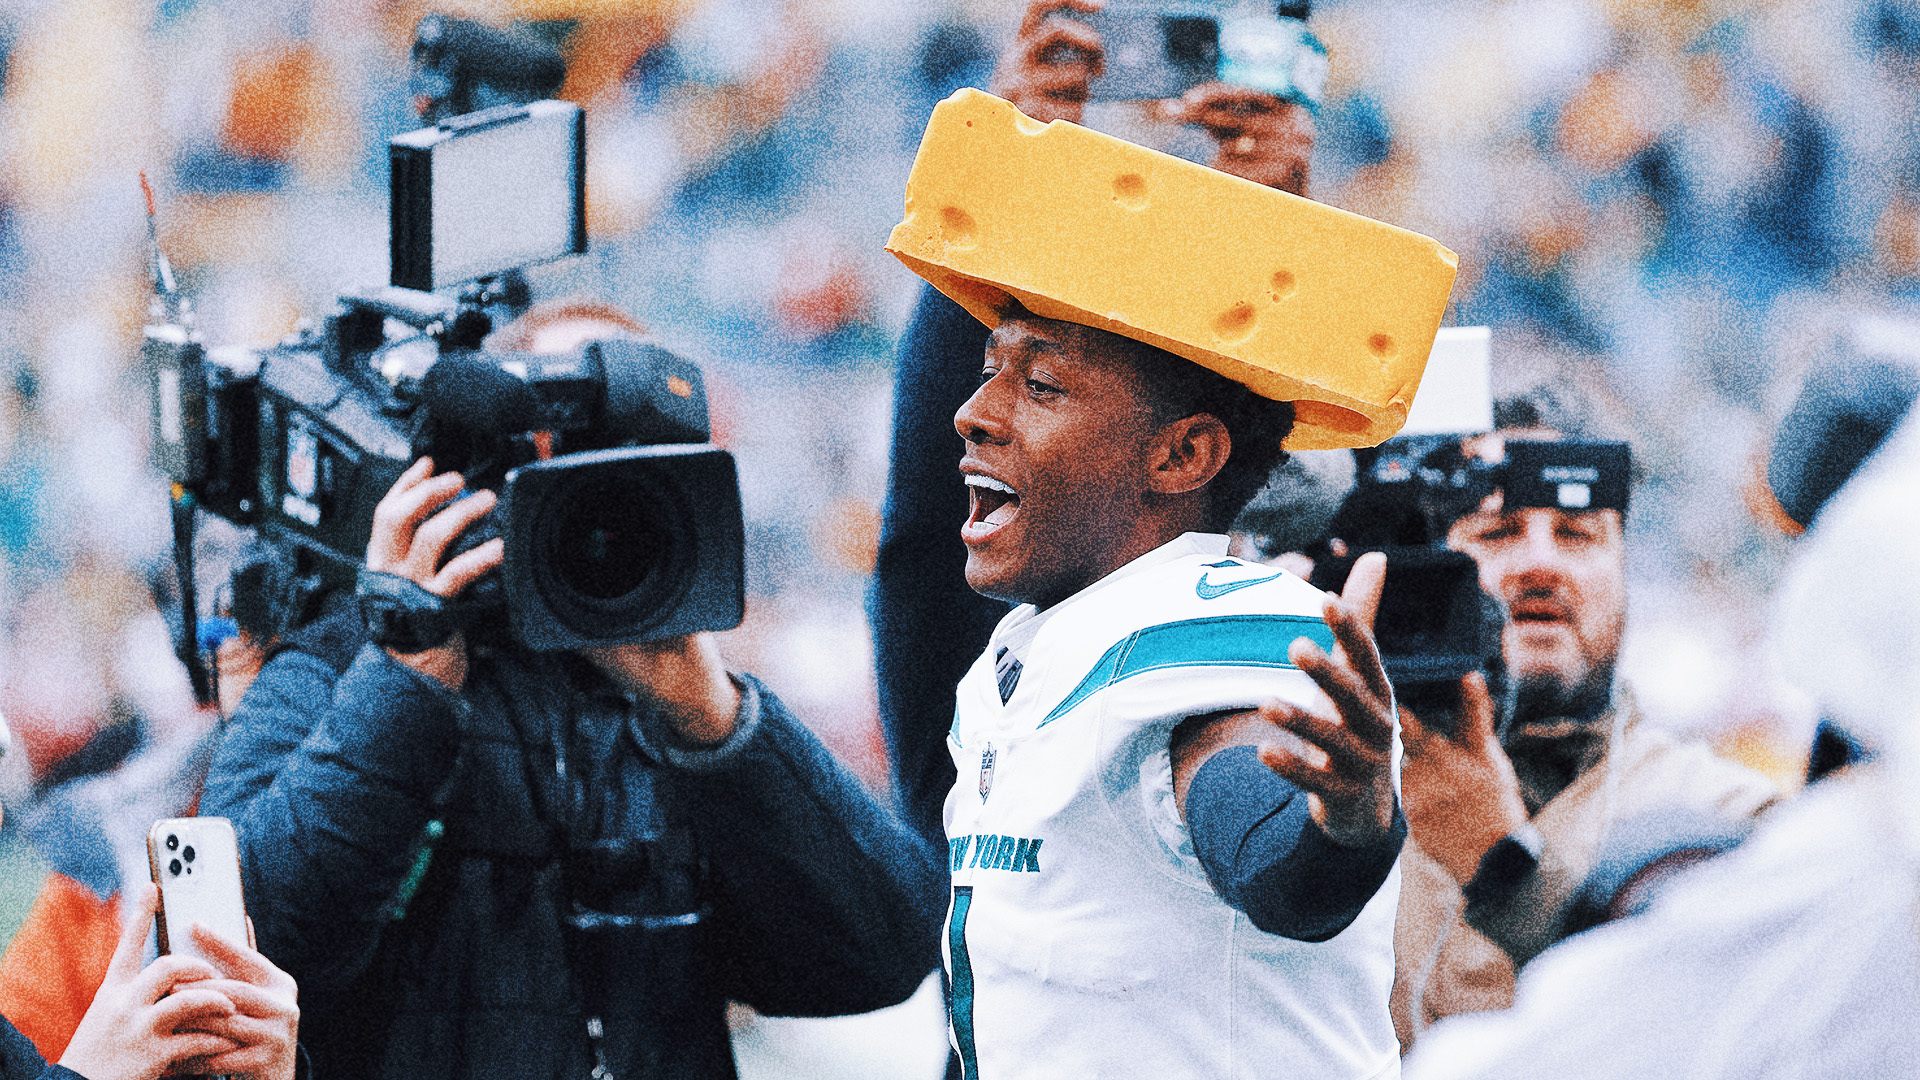 Sauce Gardner dons Cheesehead after Jets upset Packers